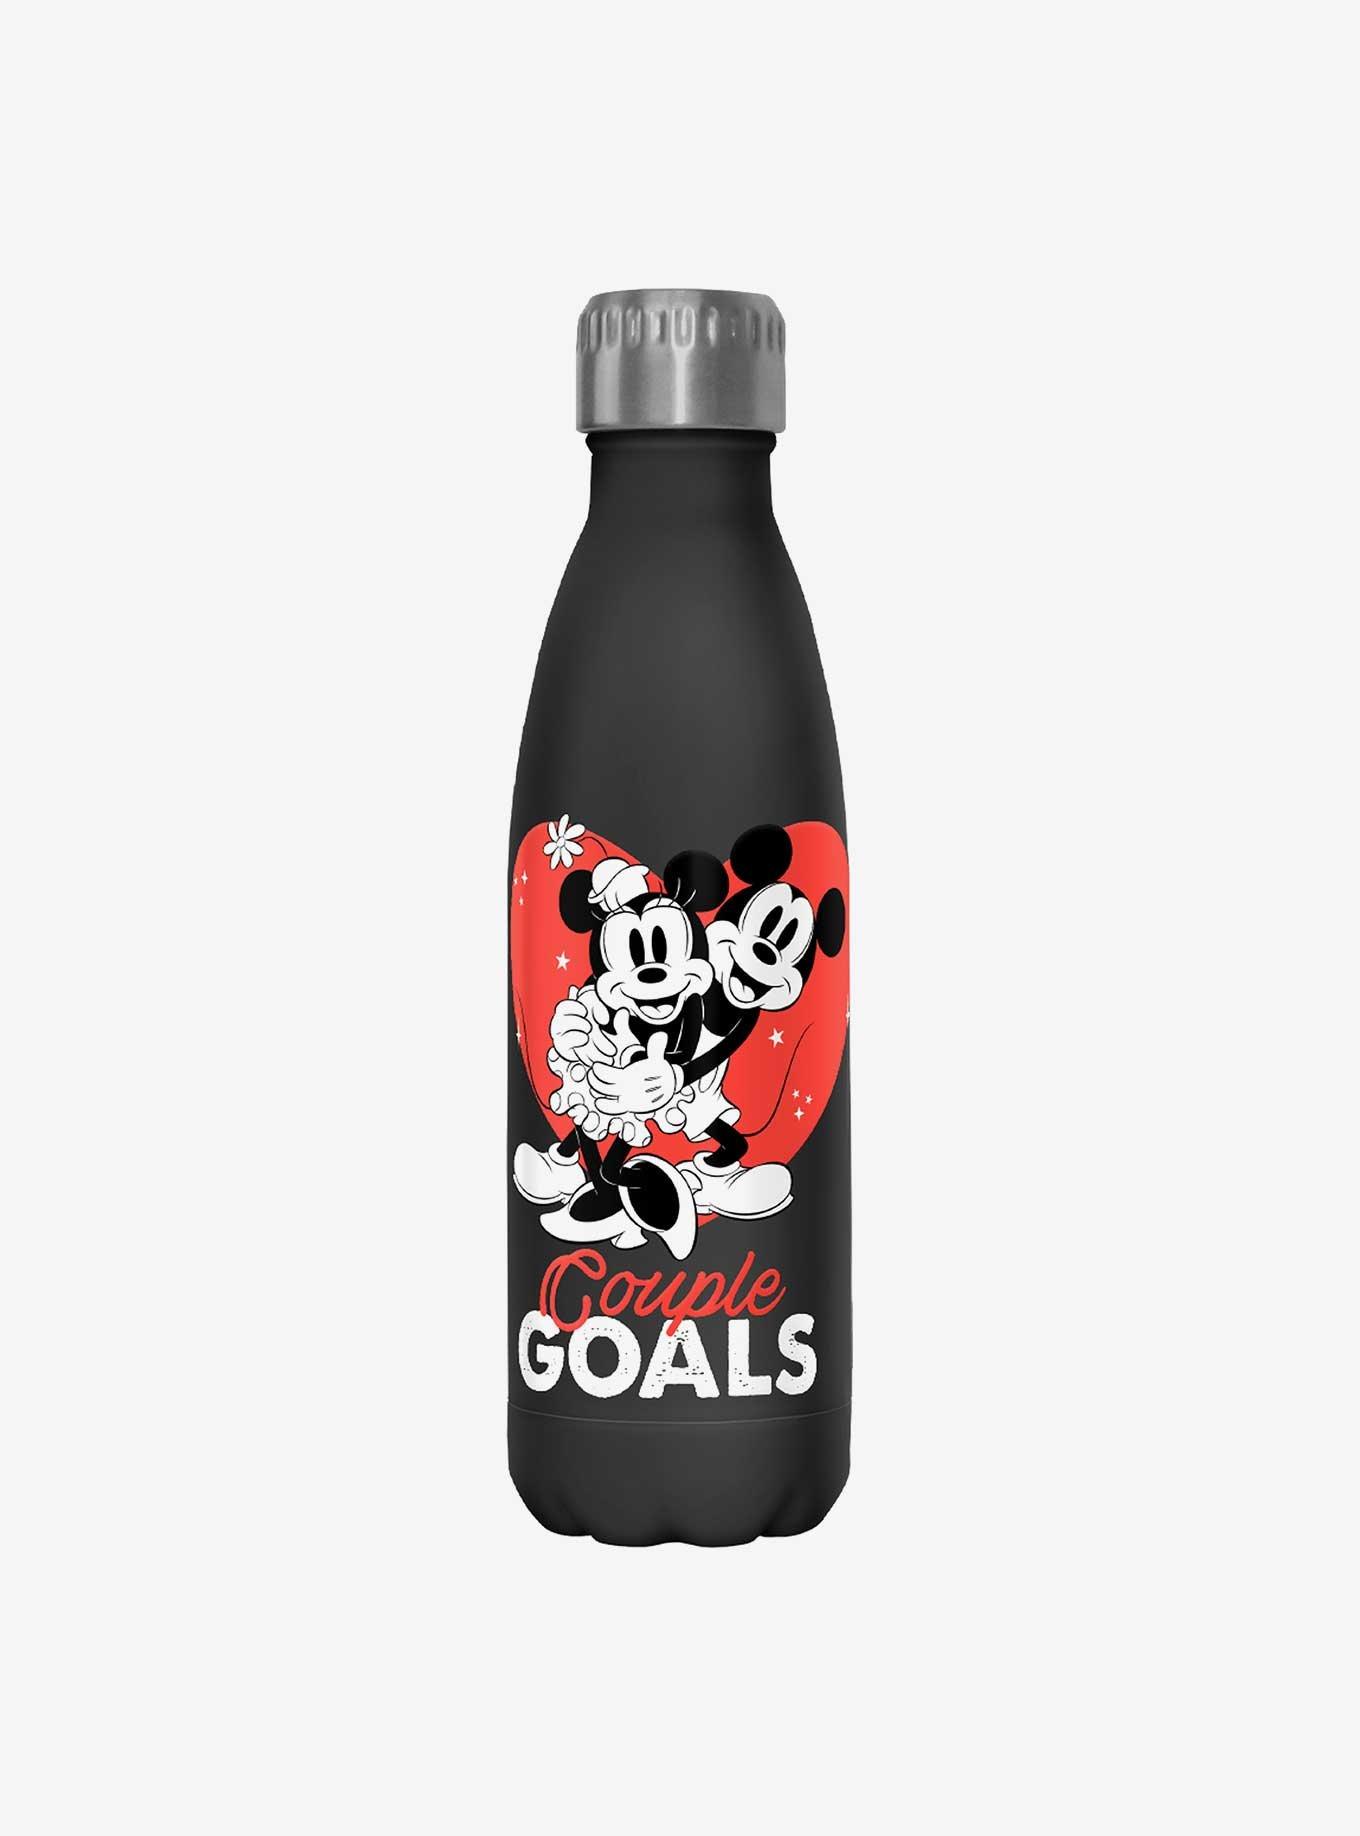 Disney Mickey Mouse Mickey and Minnie Couple Goals Water Bottle - BLACK